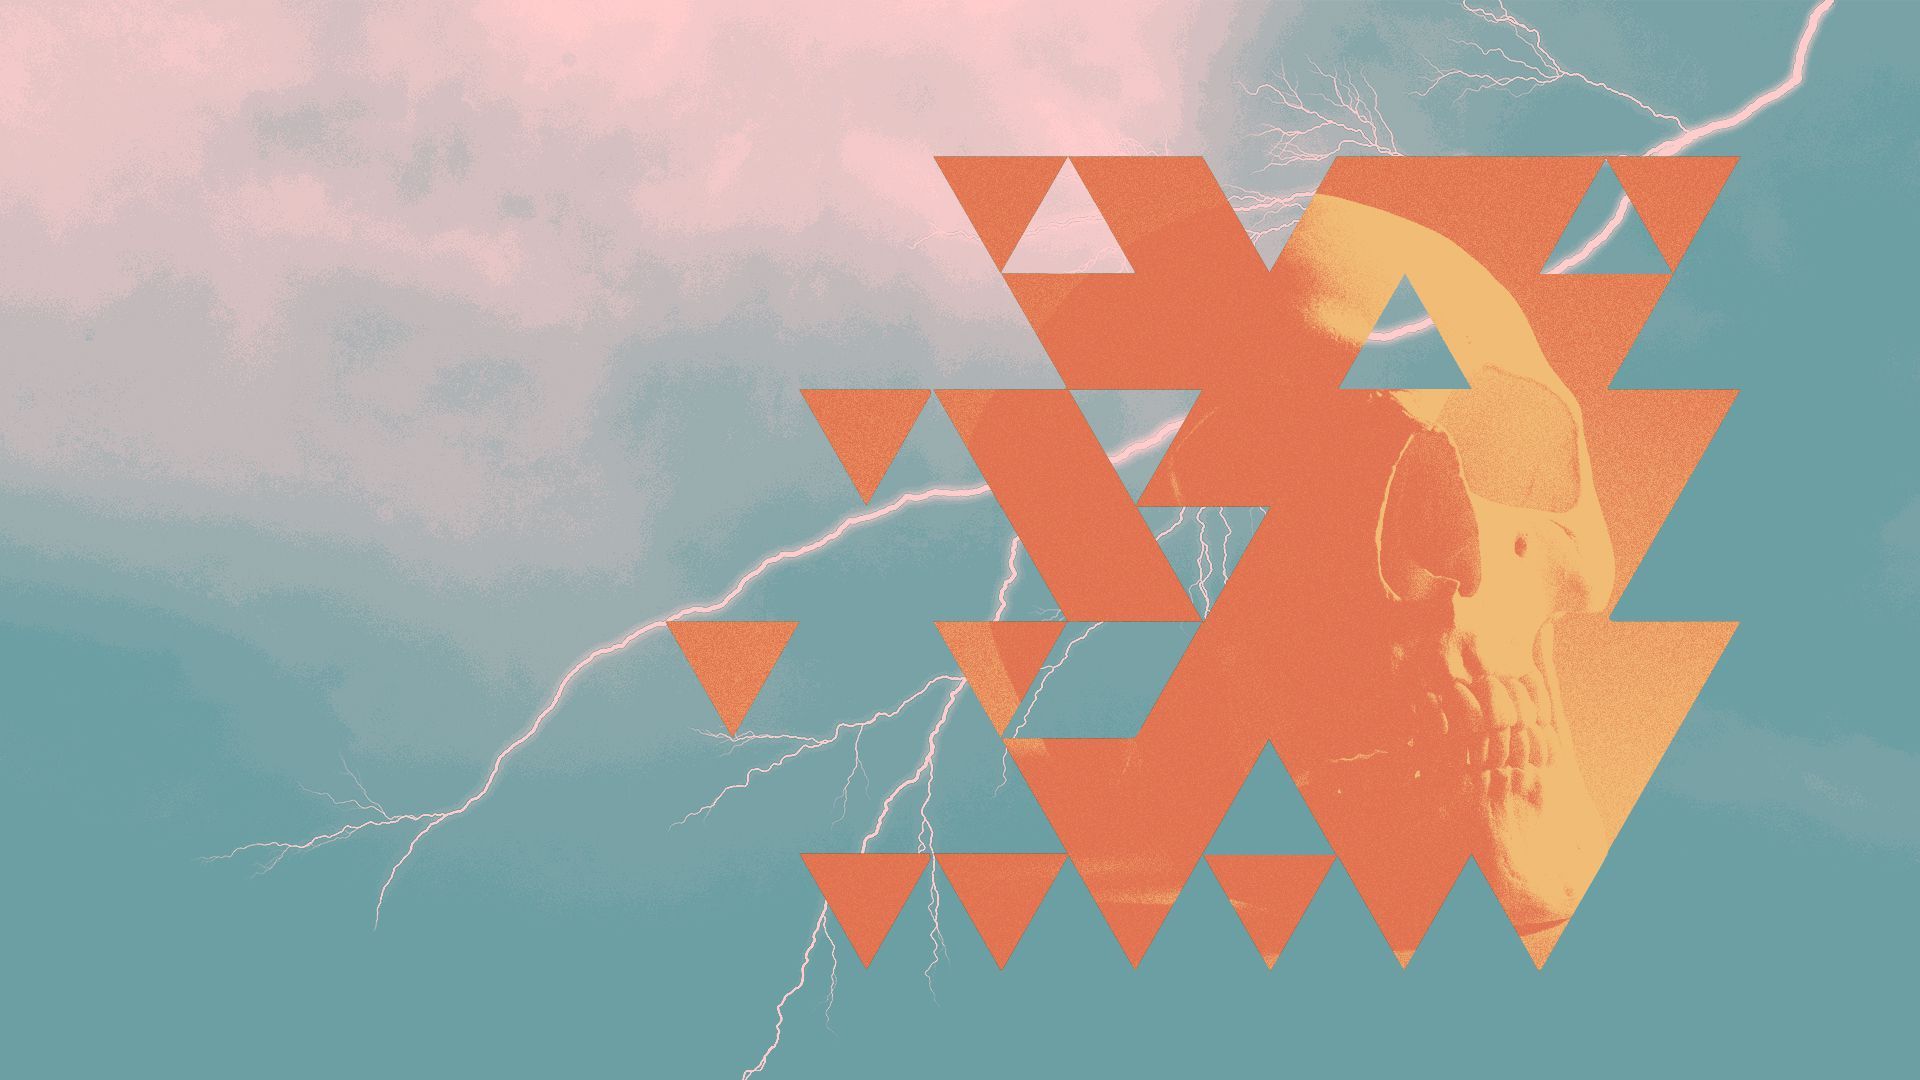 Illustration of a skull masked by a triangle pattern over a stormy sky.